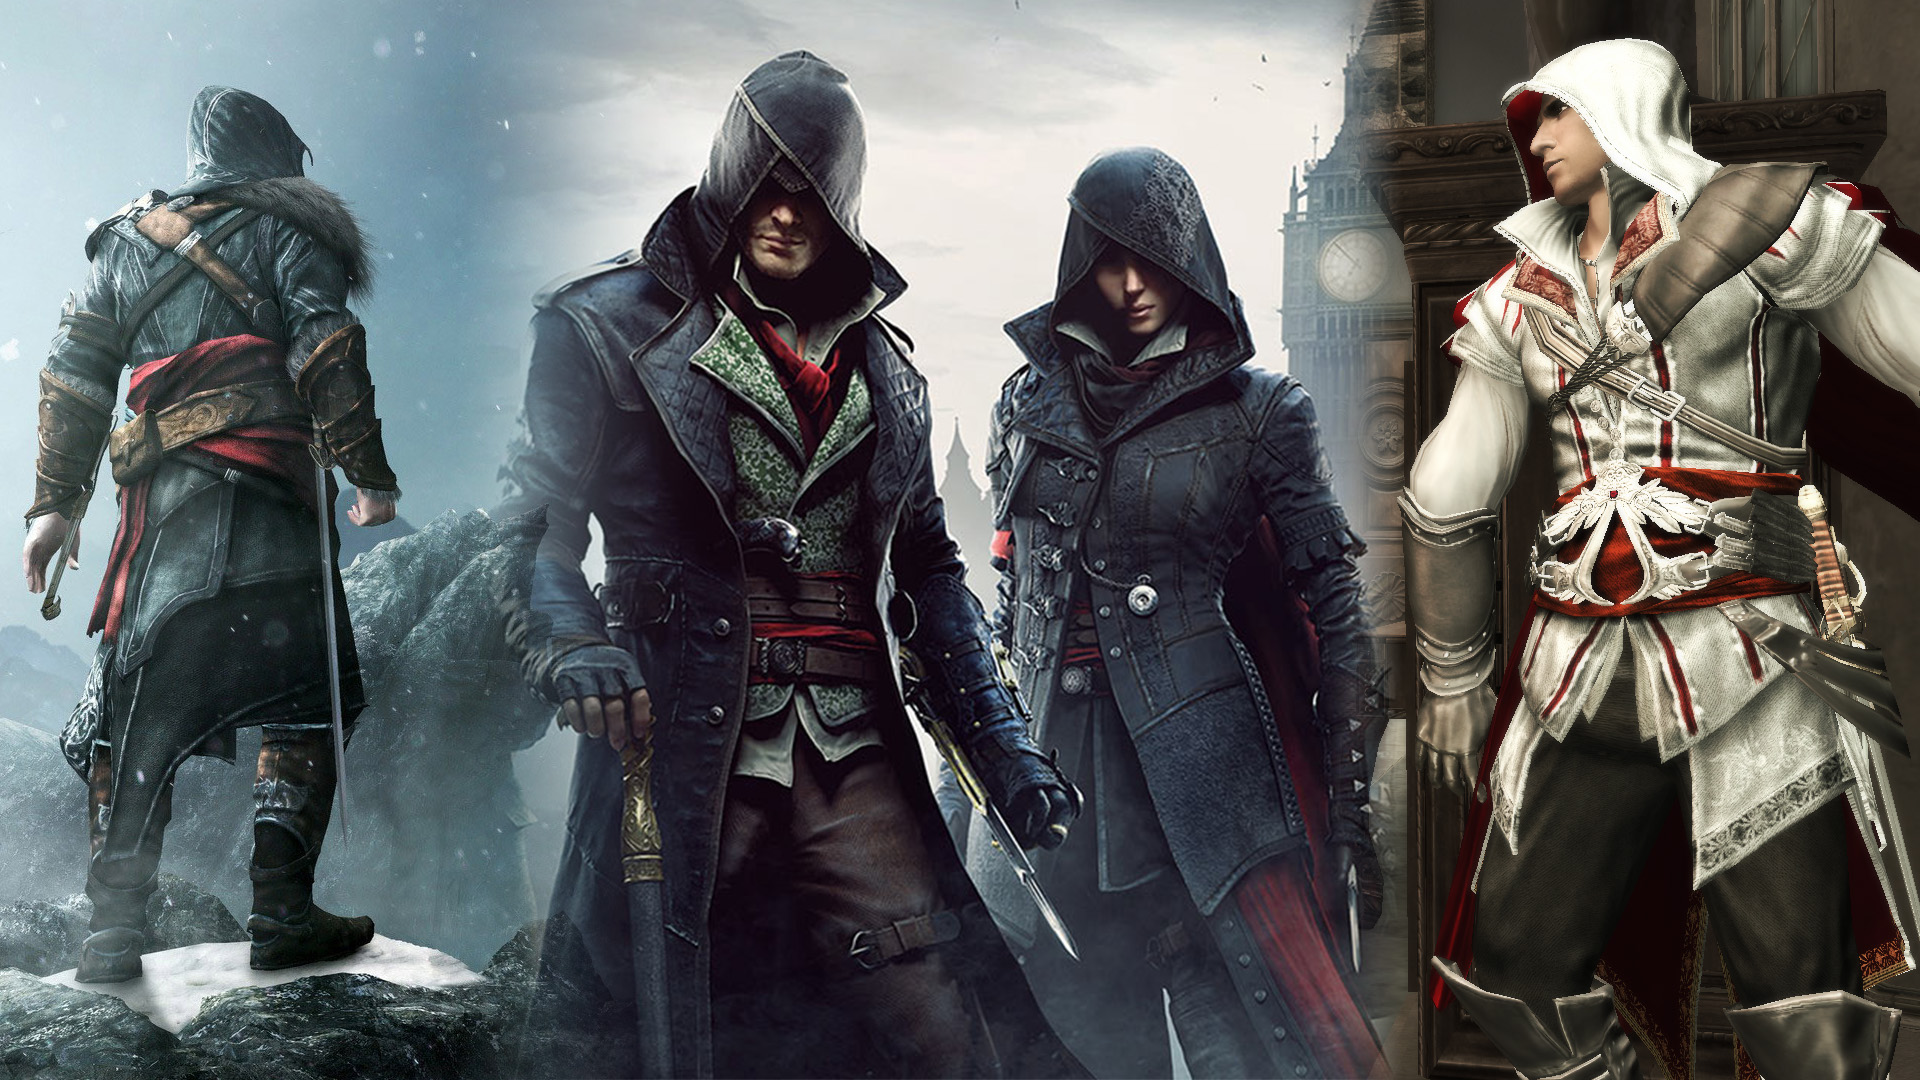 The best Assassin's Creed game has the worst rep